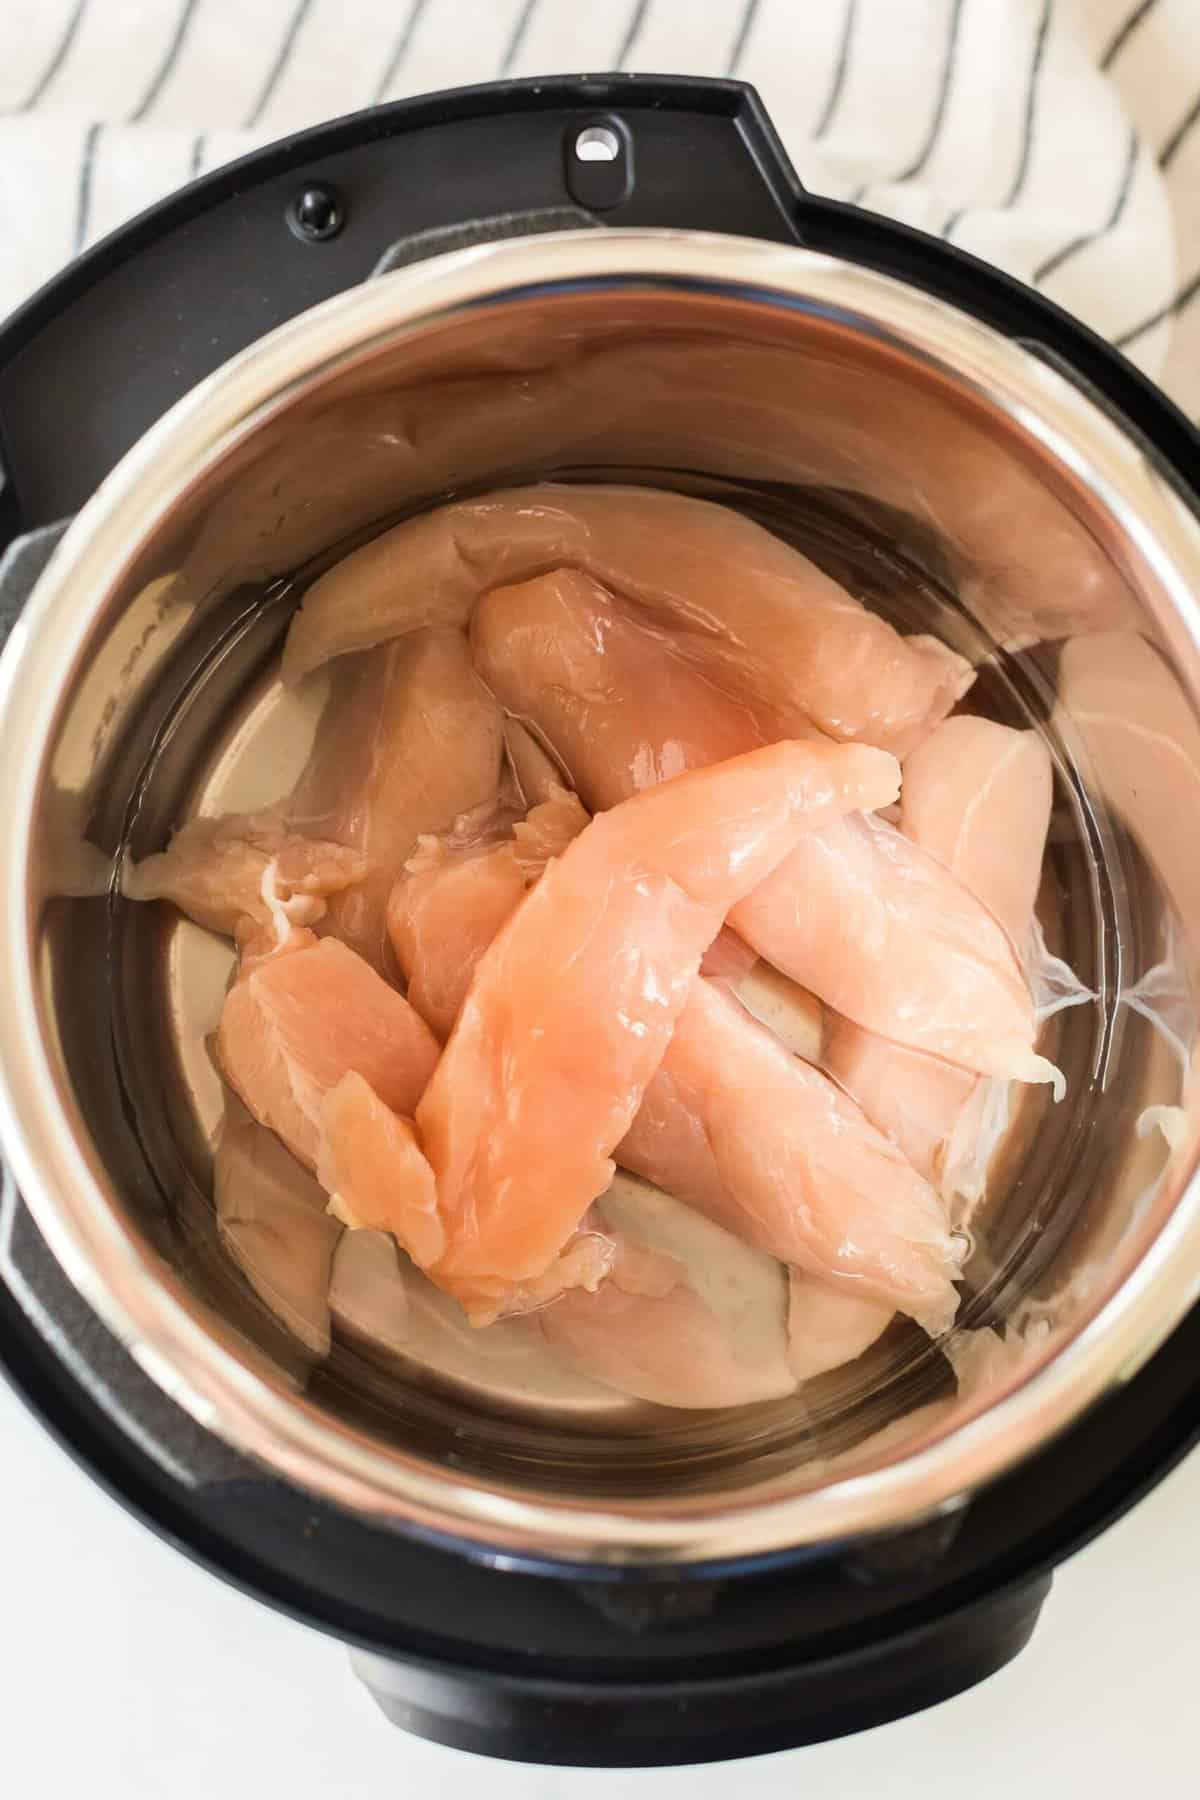 raw chicken in a pot of water ready to be cooked